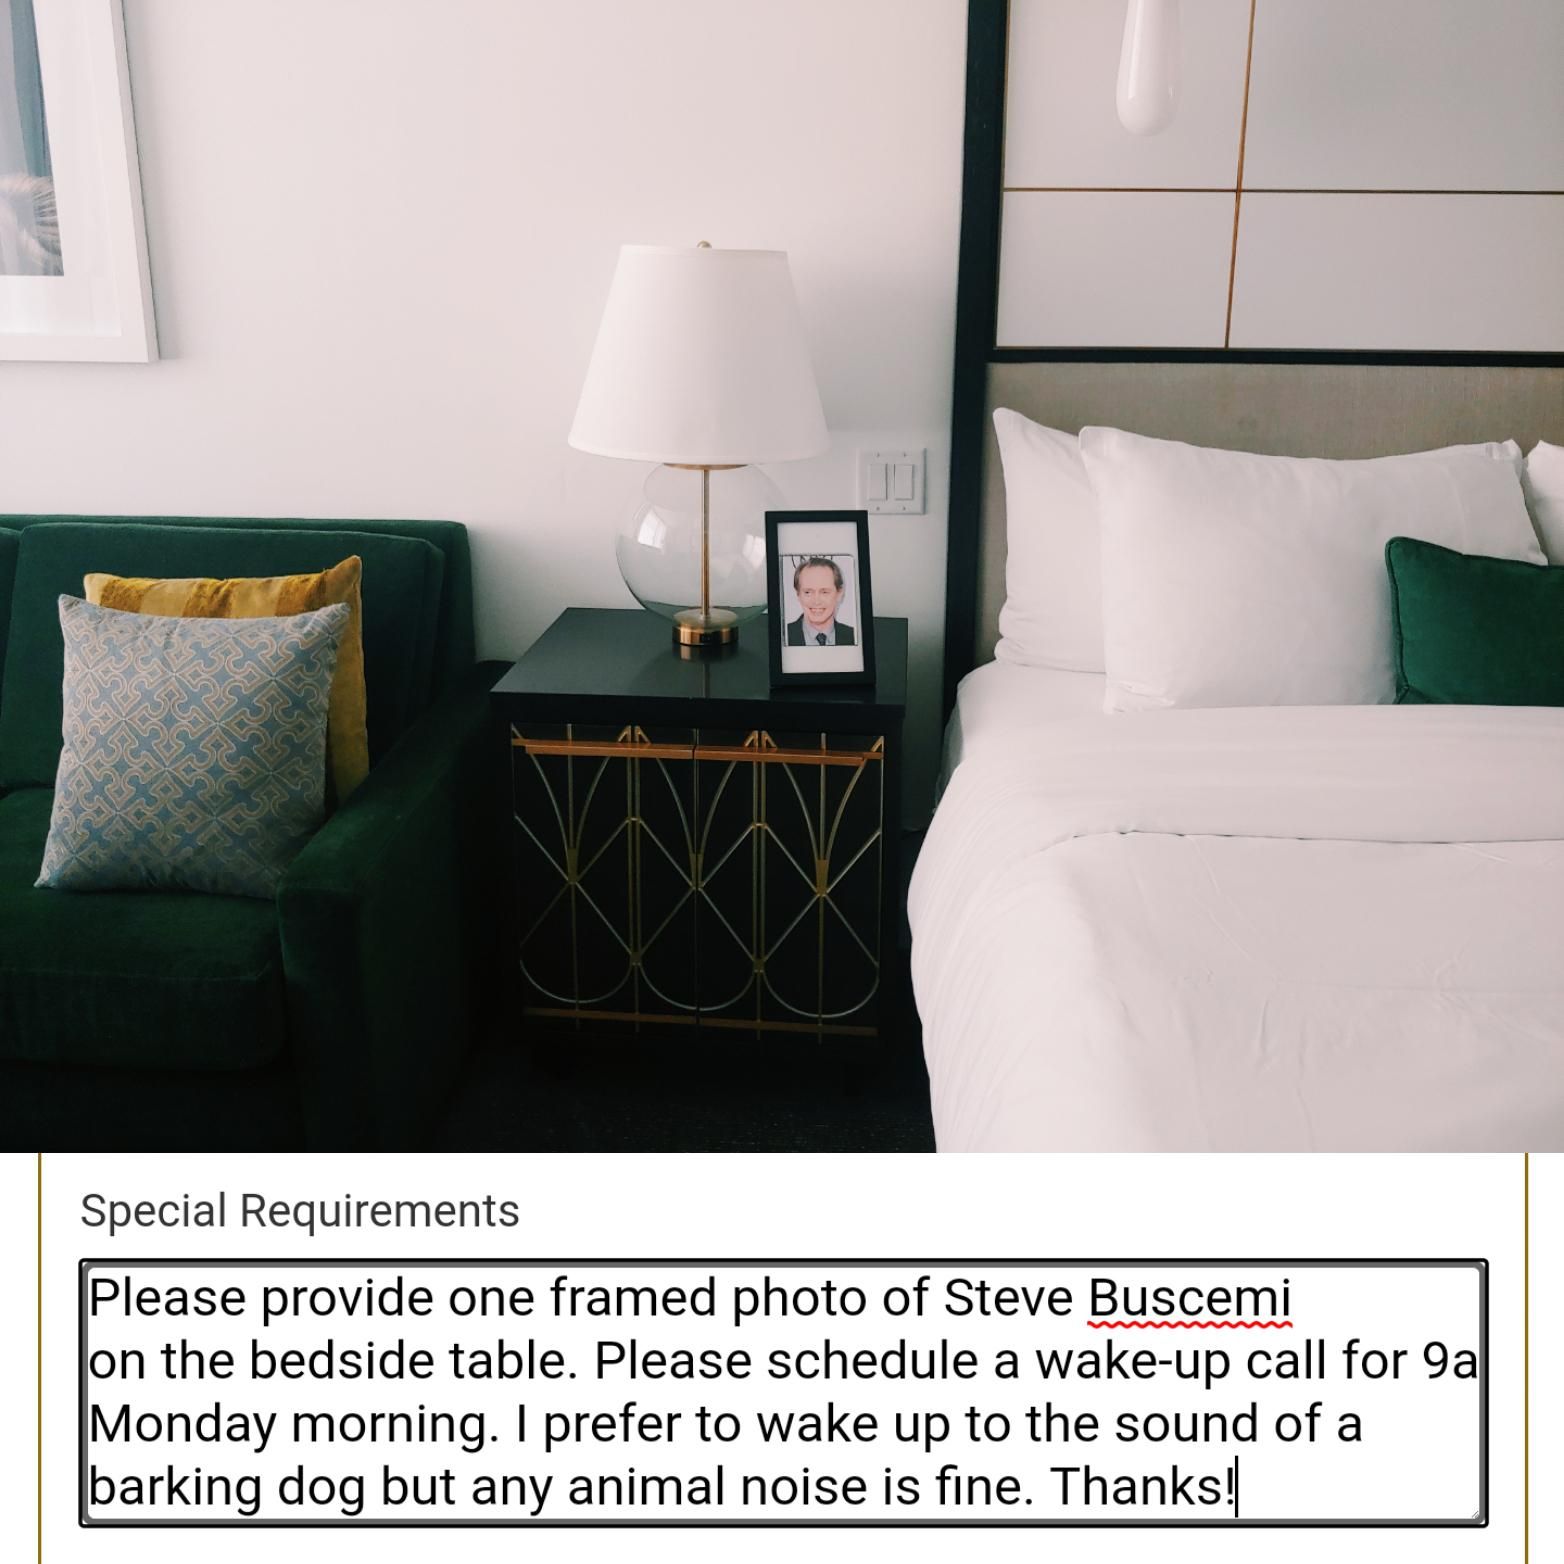 My hotel delivered on my framed photo of Steve Buscemi request.